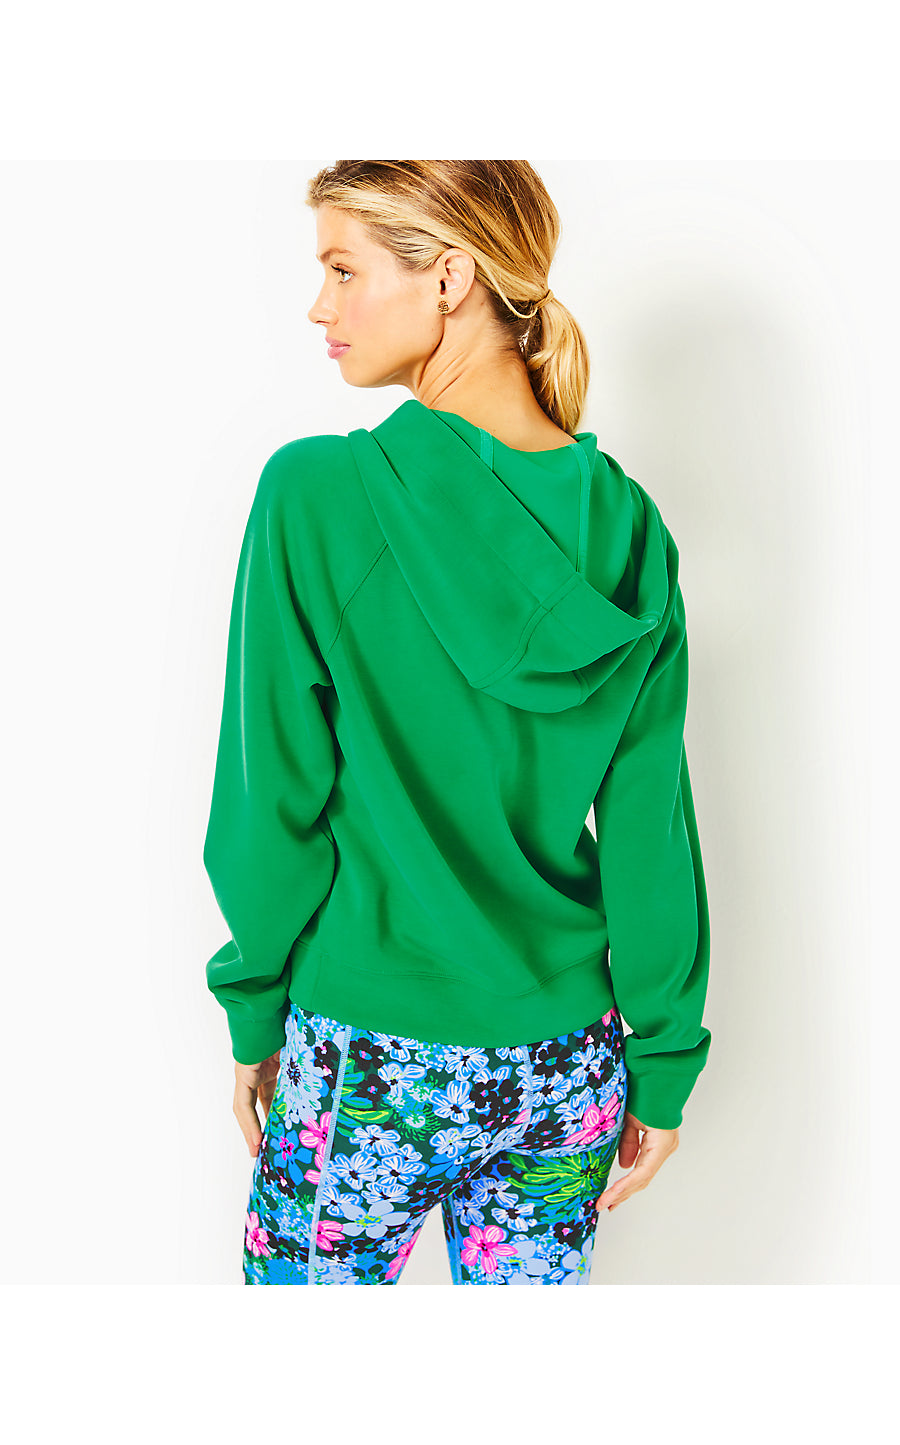 KENDY PULLOVER - KELLY GREEN